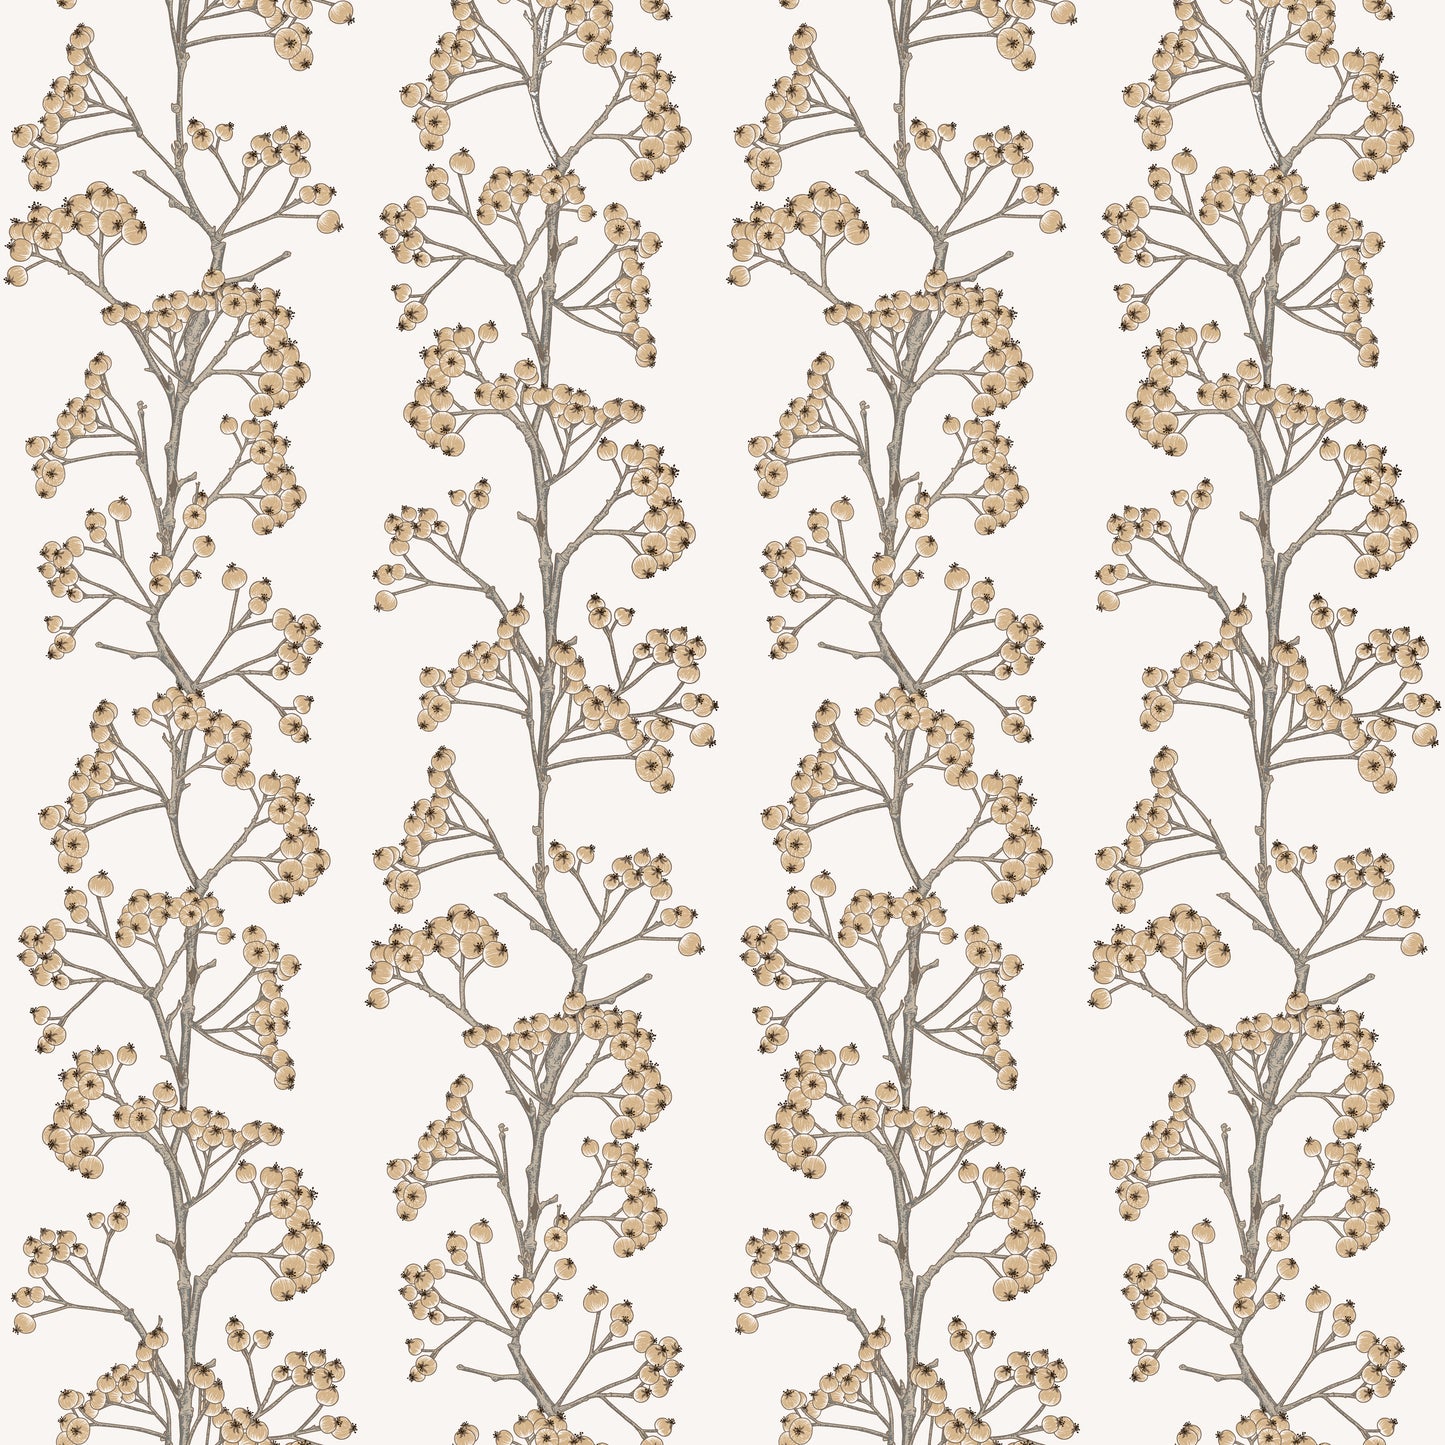 Tan firethorn print on cream background easy to install and remove peel and stick custom wallpaper available in different lengths/sizes locally created and printed in Canada. Removable, washable, durable, commercial grade, customizable and water proof.